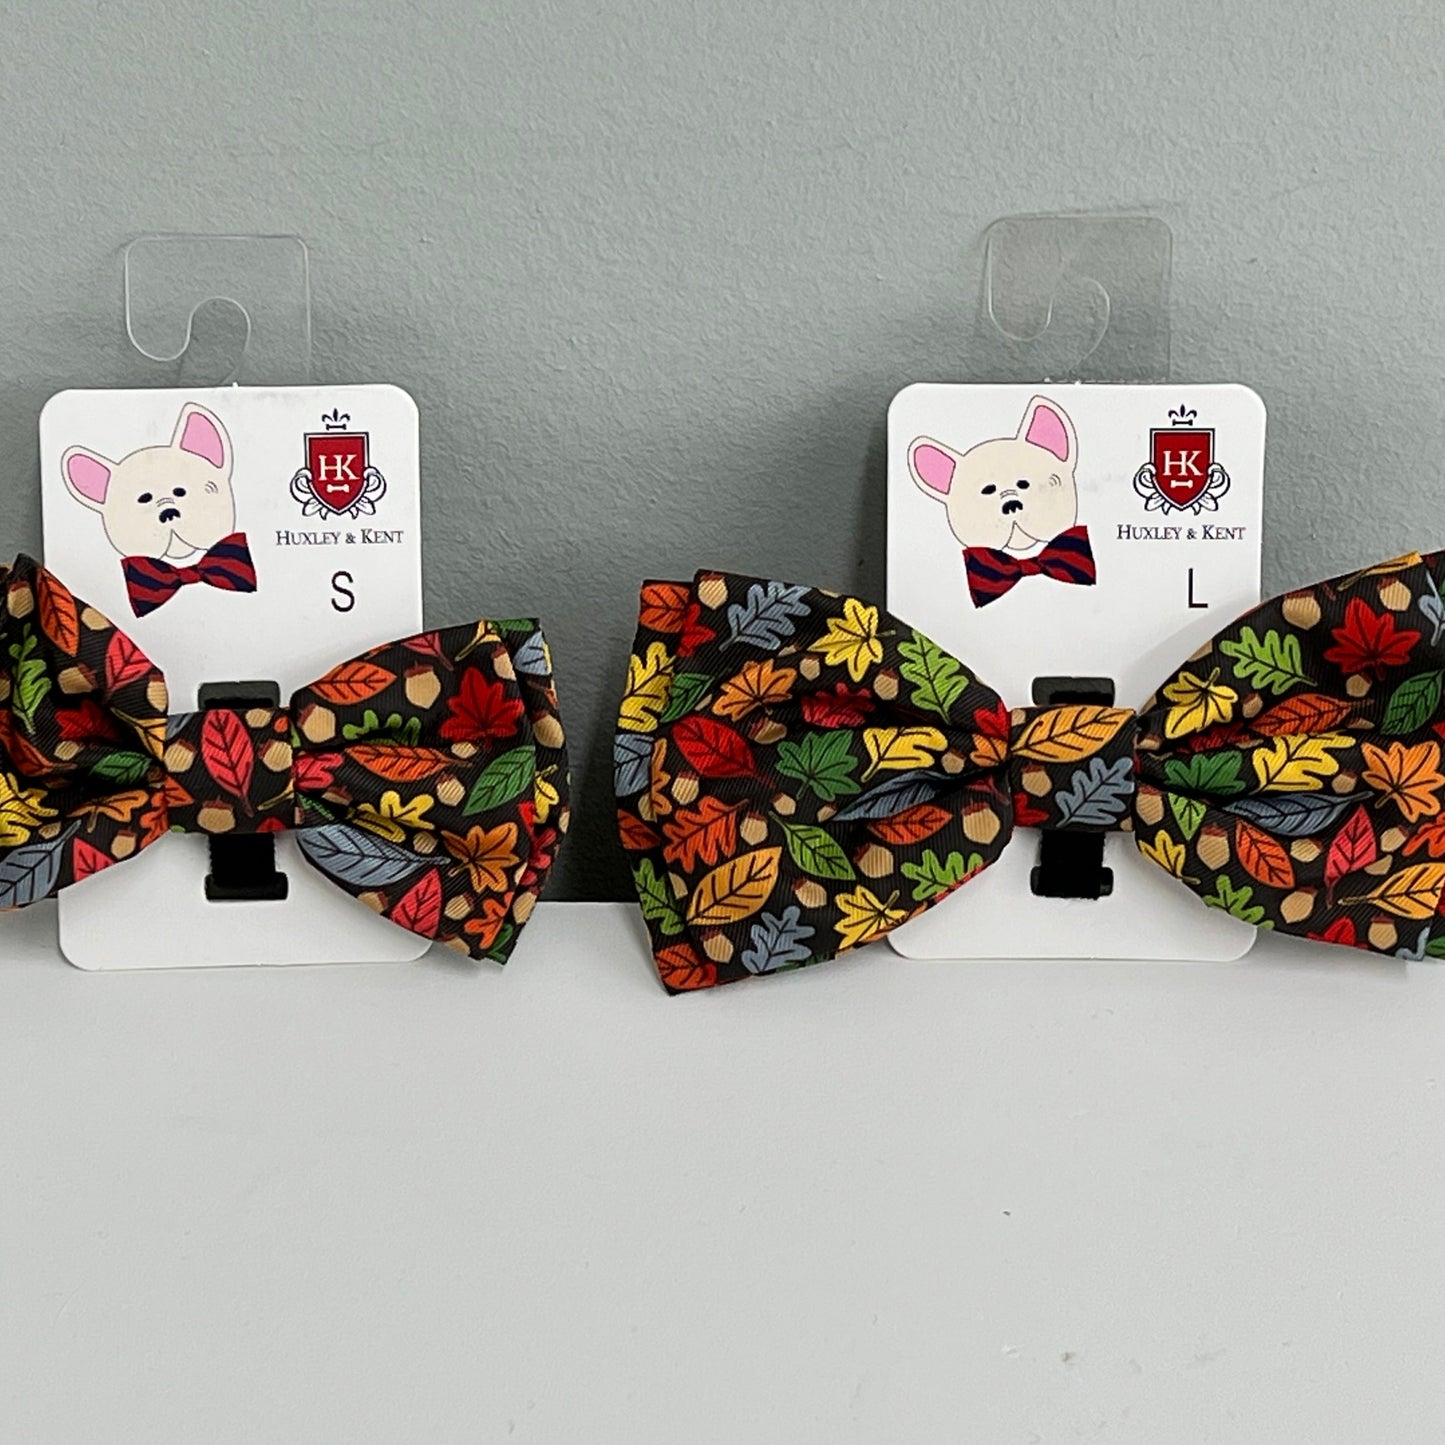 Fall Leaves Bow Tie